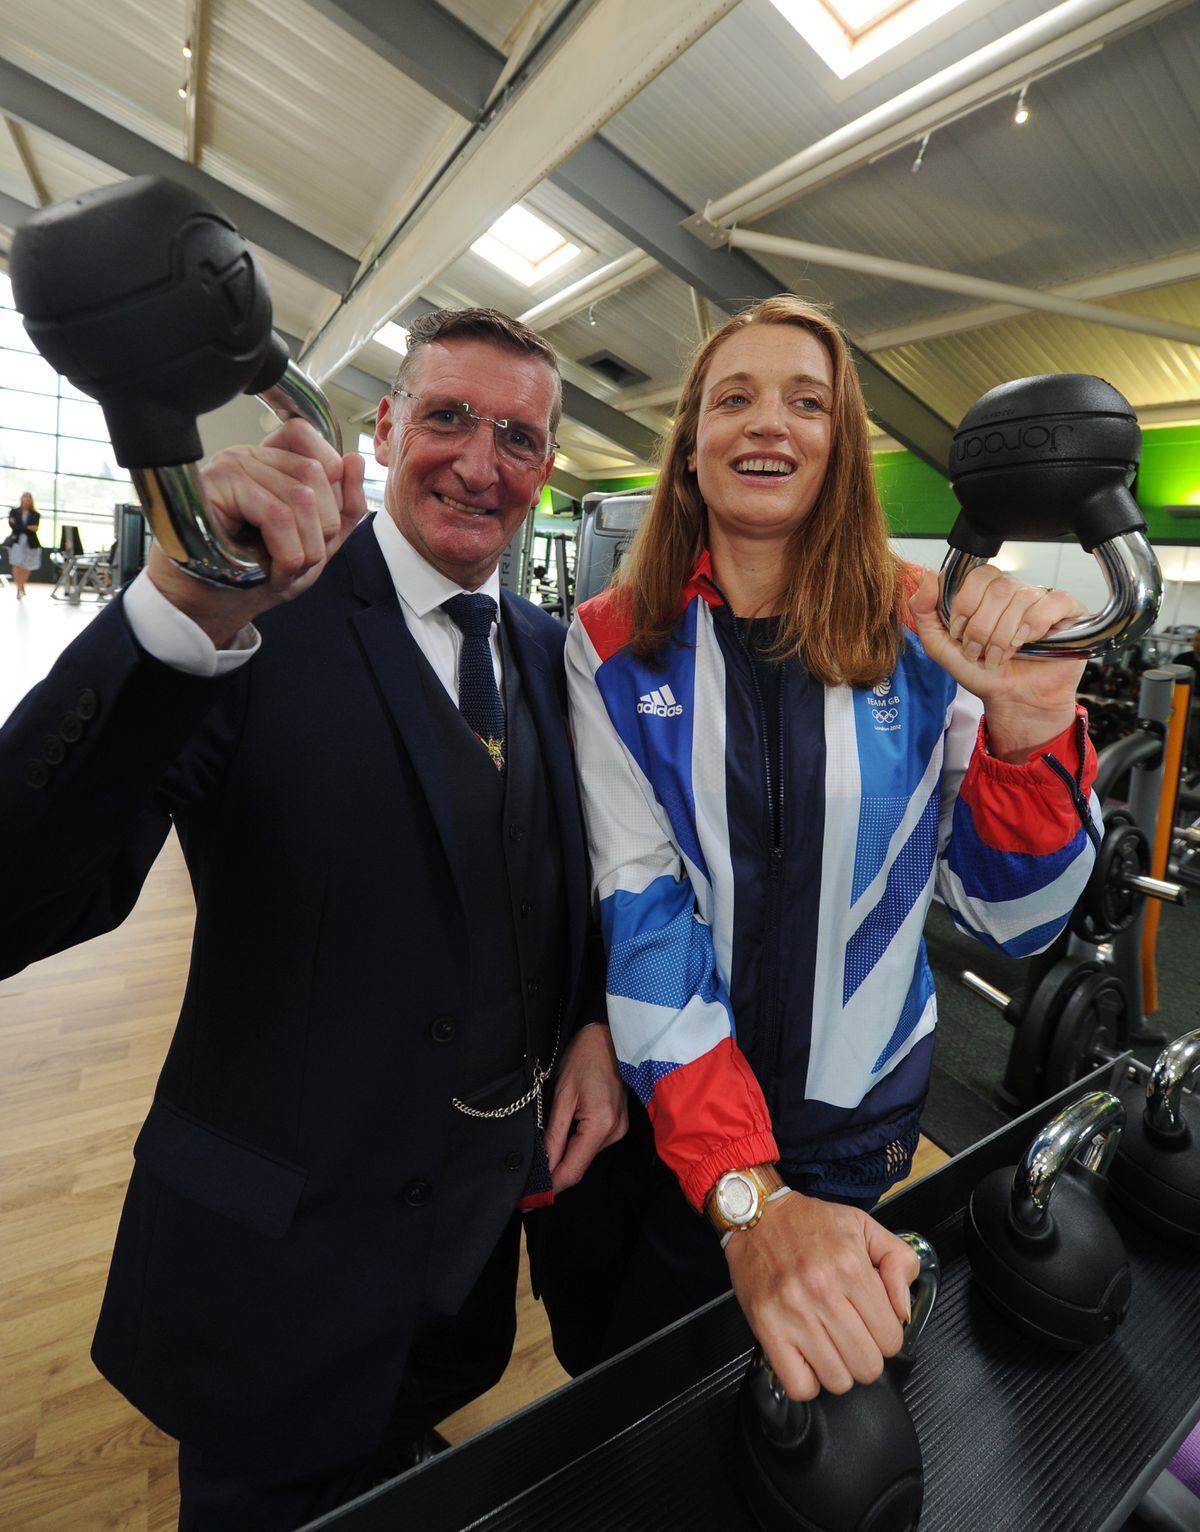 Alison Williamson will be part of the relay route through Stafford